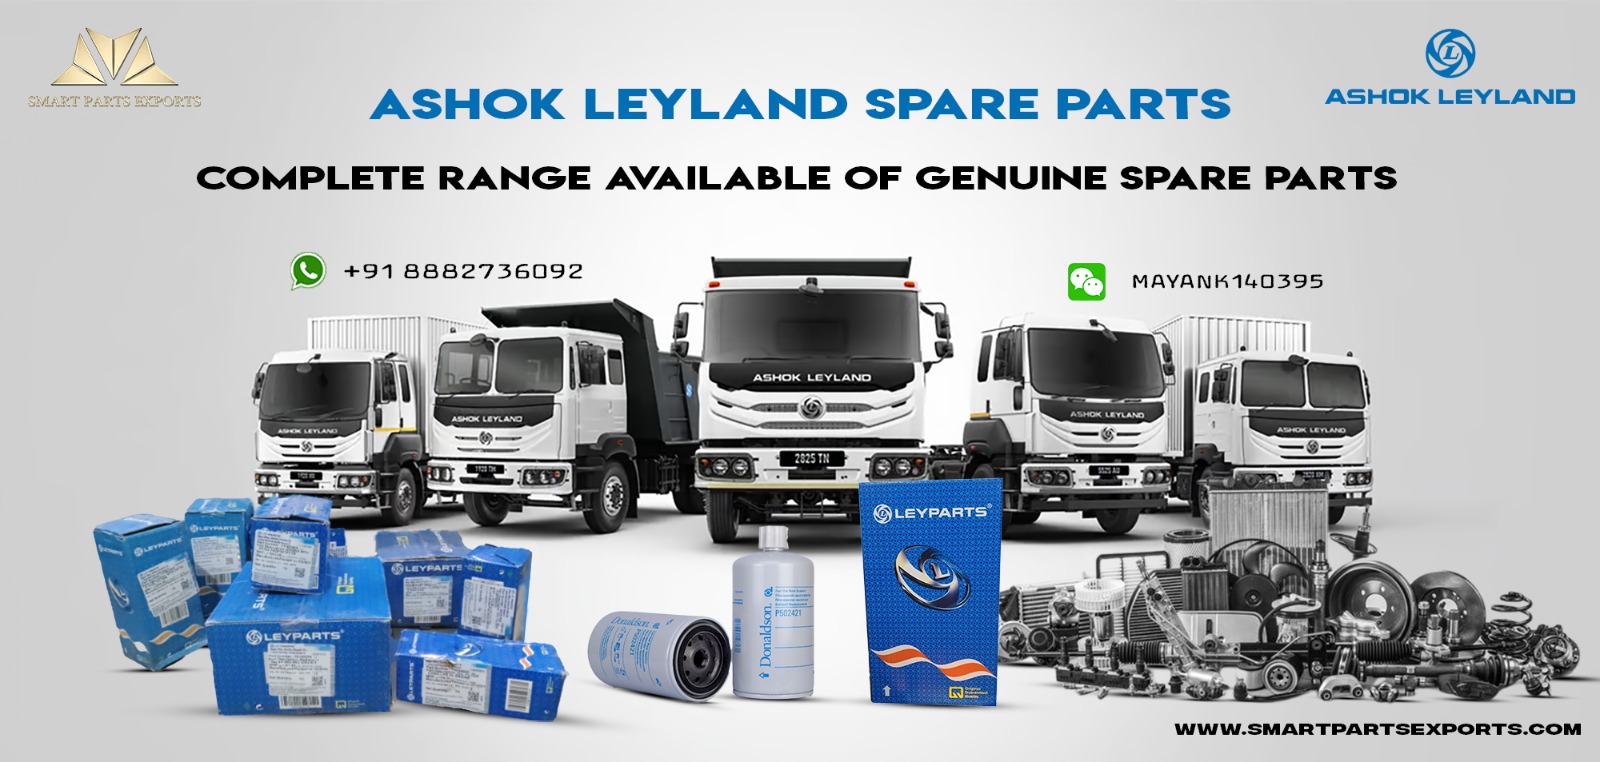 Buy Ashok Leyland spare parts from India.